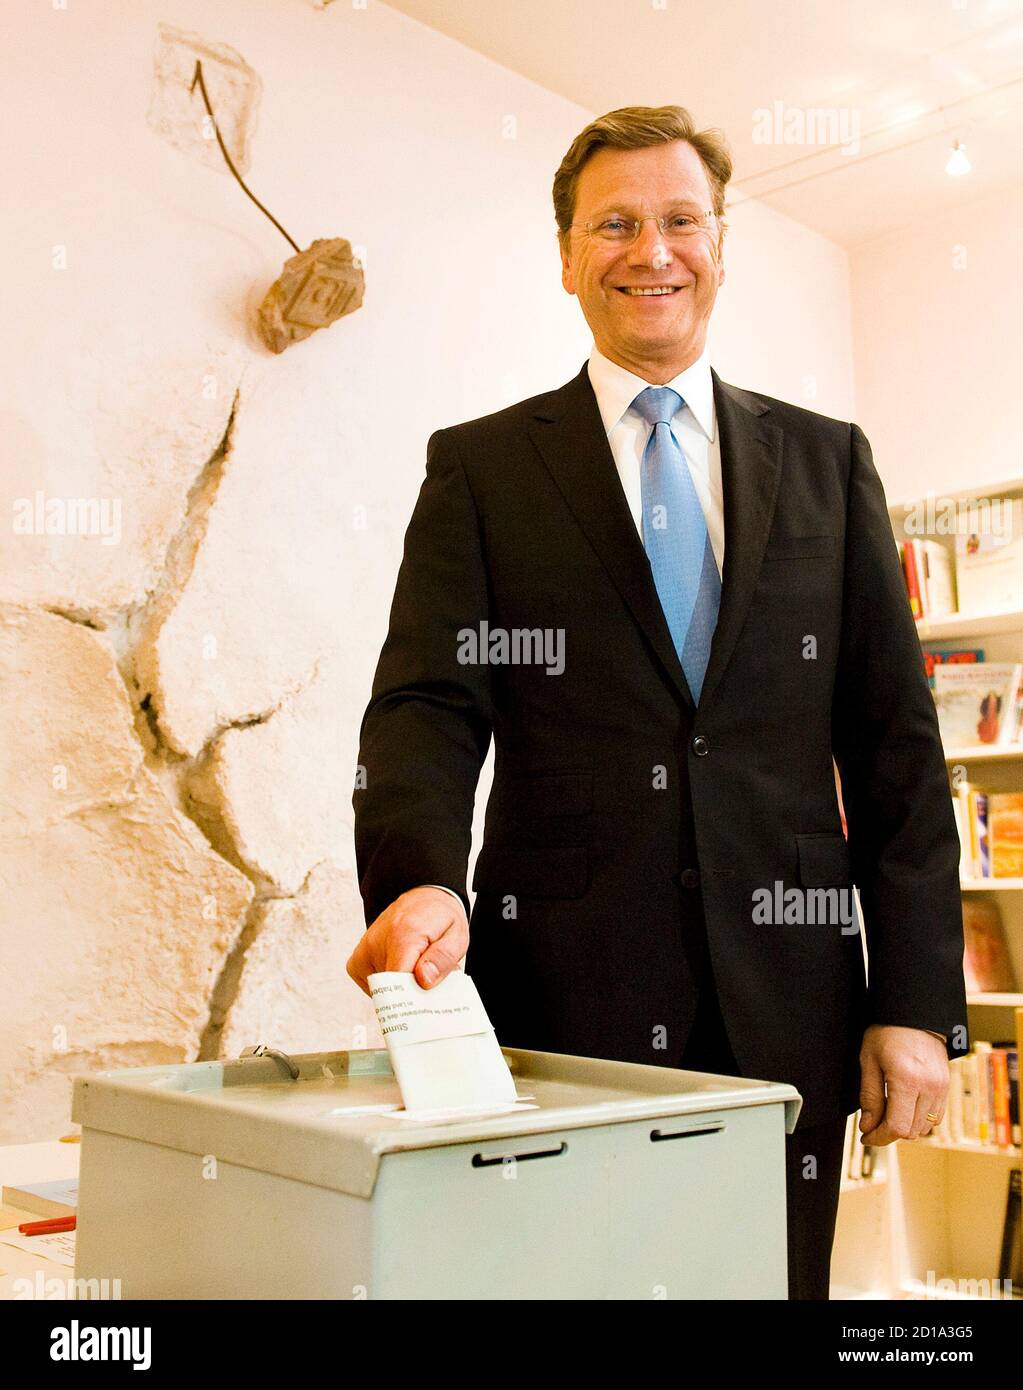 Free Democratic Party (FDP) party leader Guido Westerwelle casts his vote during the European Parliament elections at a parish office in Bonn June 7, 2009.  REUTERS/KNA-BILD/Kirsten Neumann (GERMANY POLITICS ELECTIONS) Stock Photo